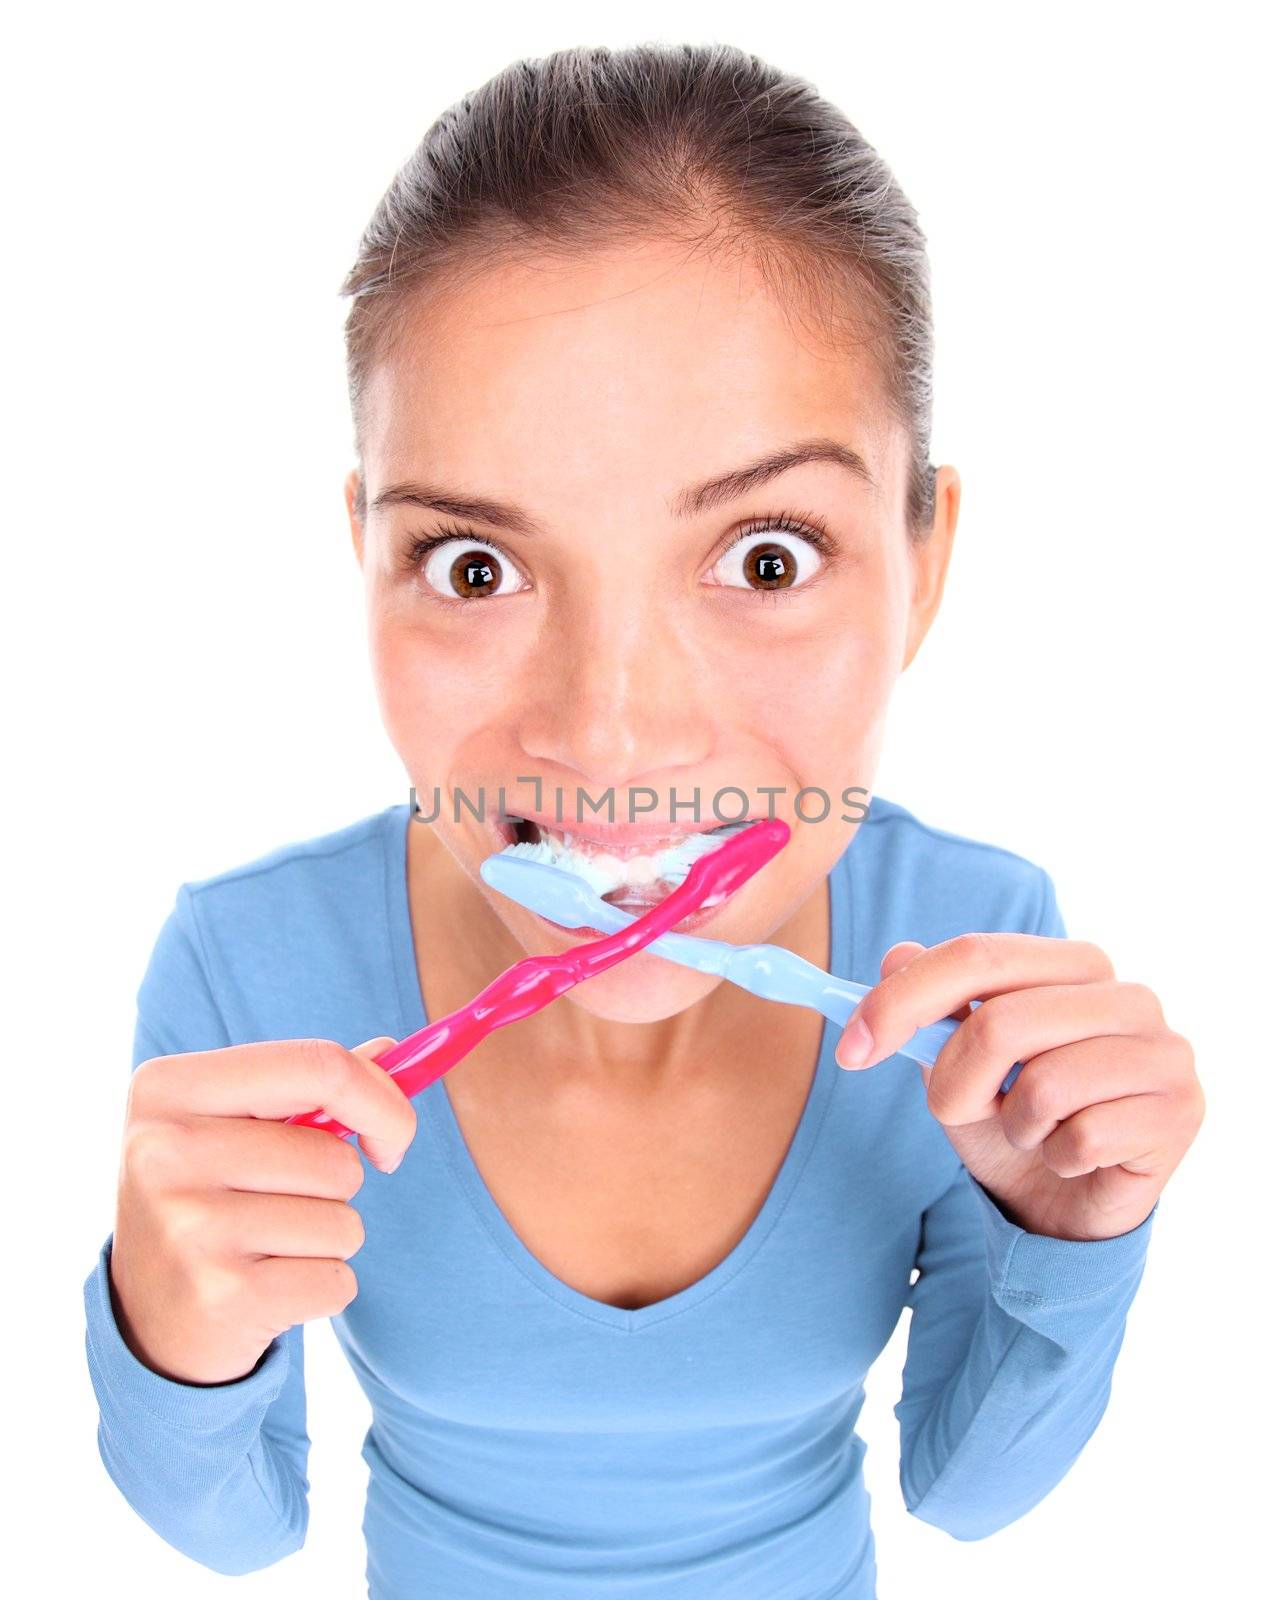 Funny woman with two toothbrushes brushing teeth. Isolated on white background. Concepts could be: 1) Being too busy and stressed in the morning and desperate to win some time. 2) Being obsessed with personal hygiene. 3) ?